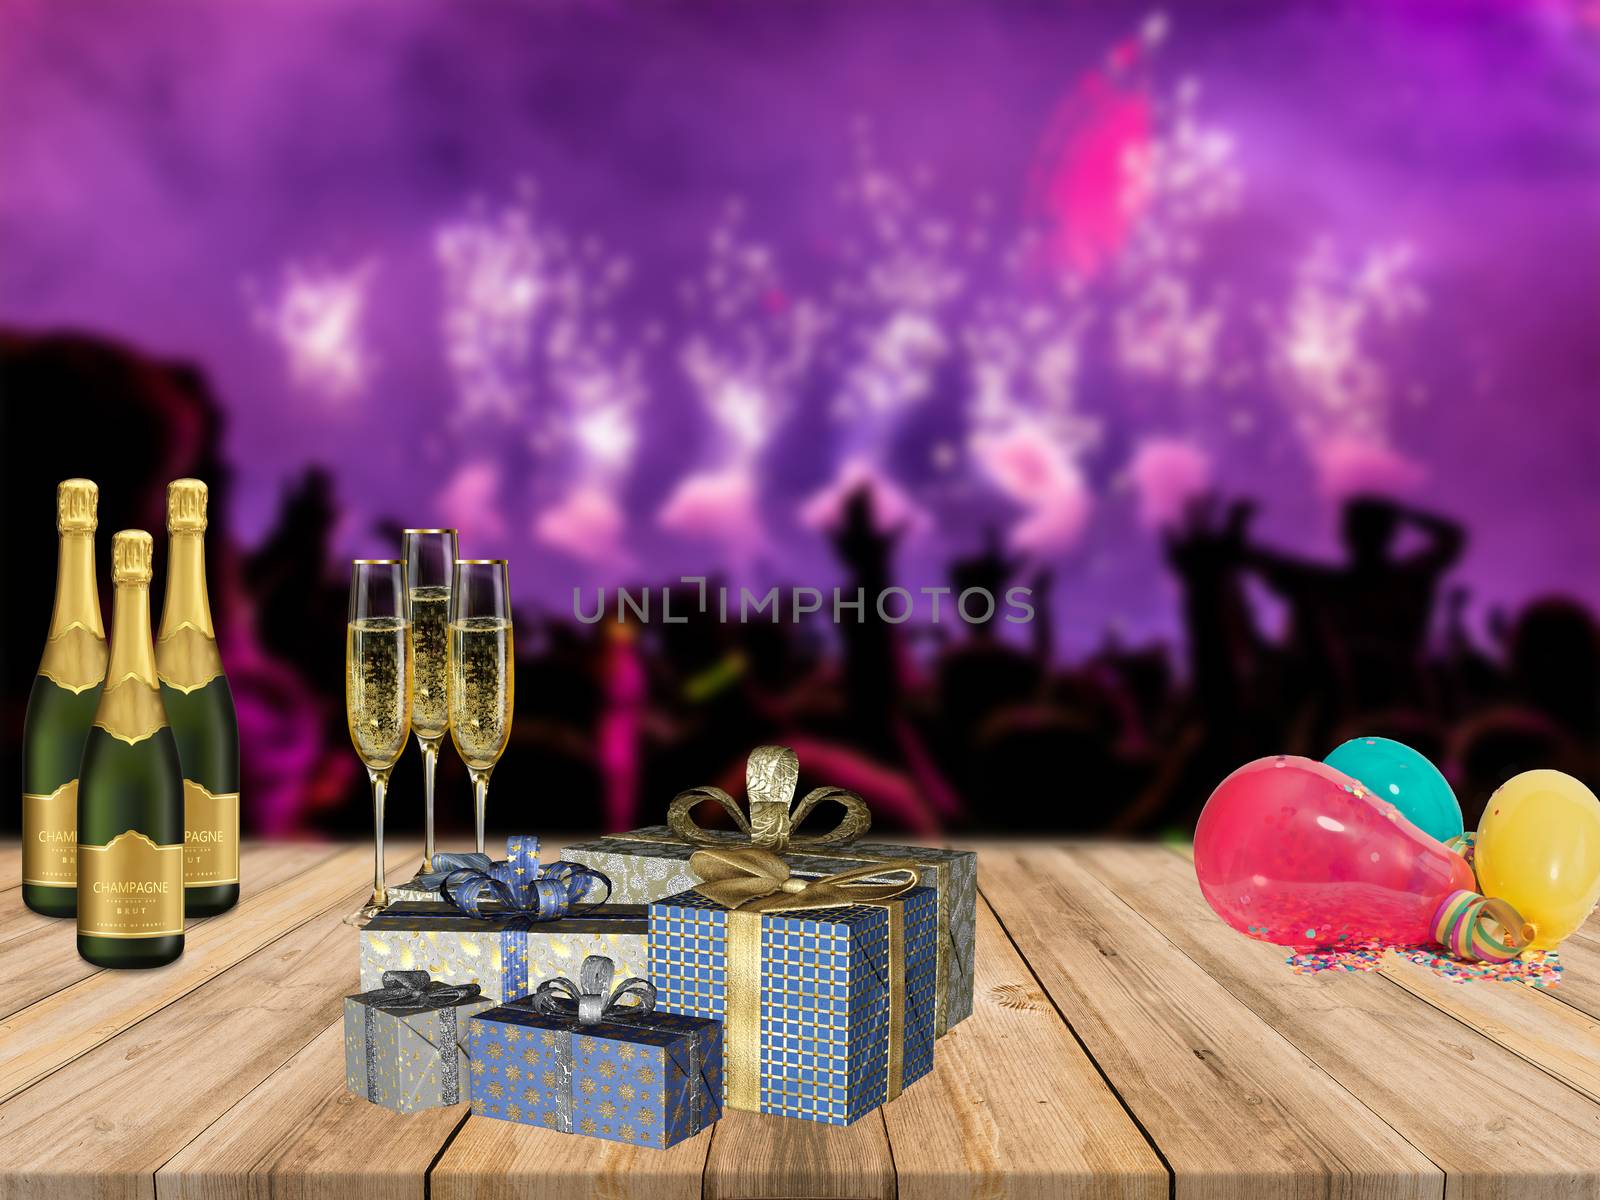 Happy new years party table with champagne presents and balloons with partying crowd and fireworks background by charlottebleijenberg